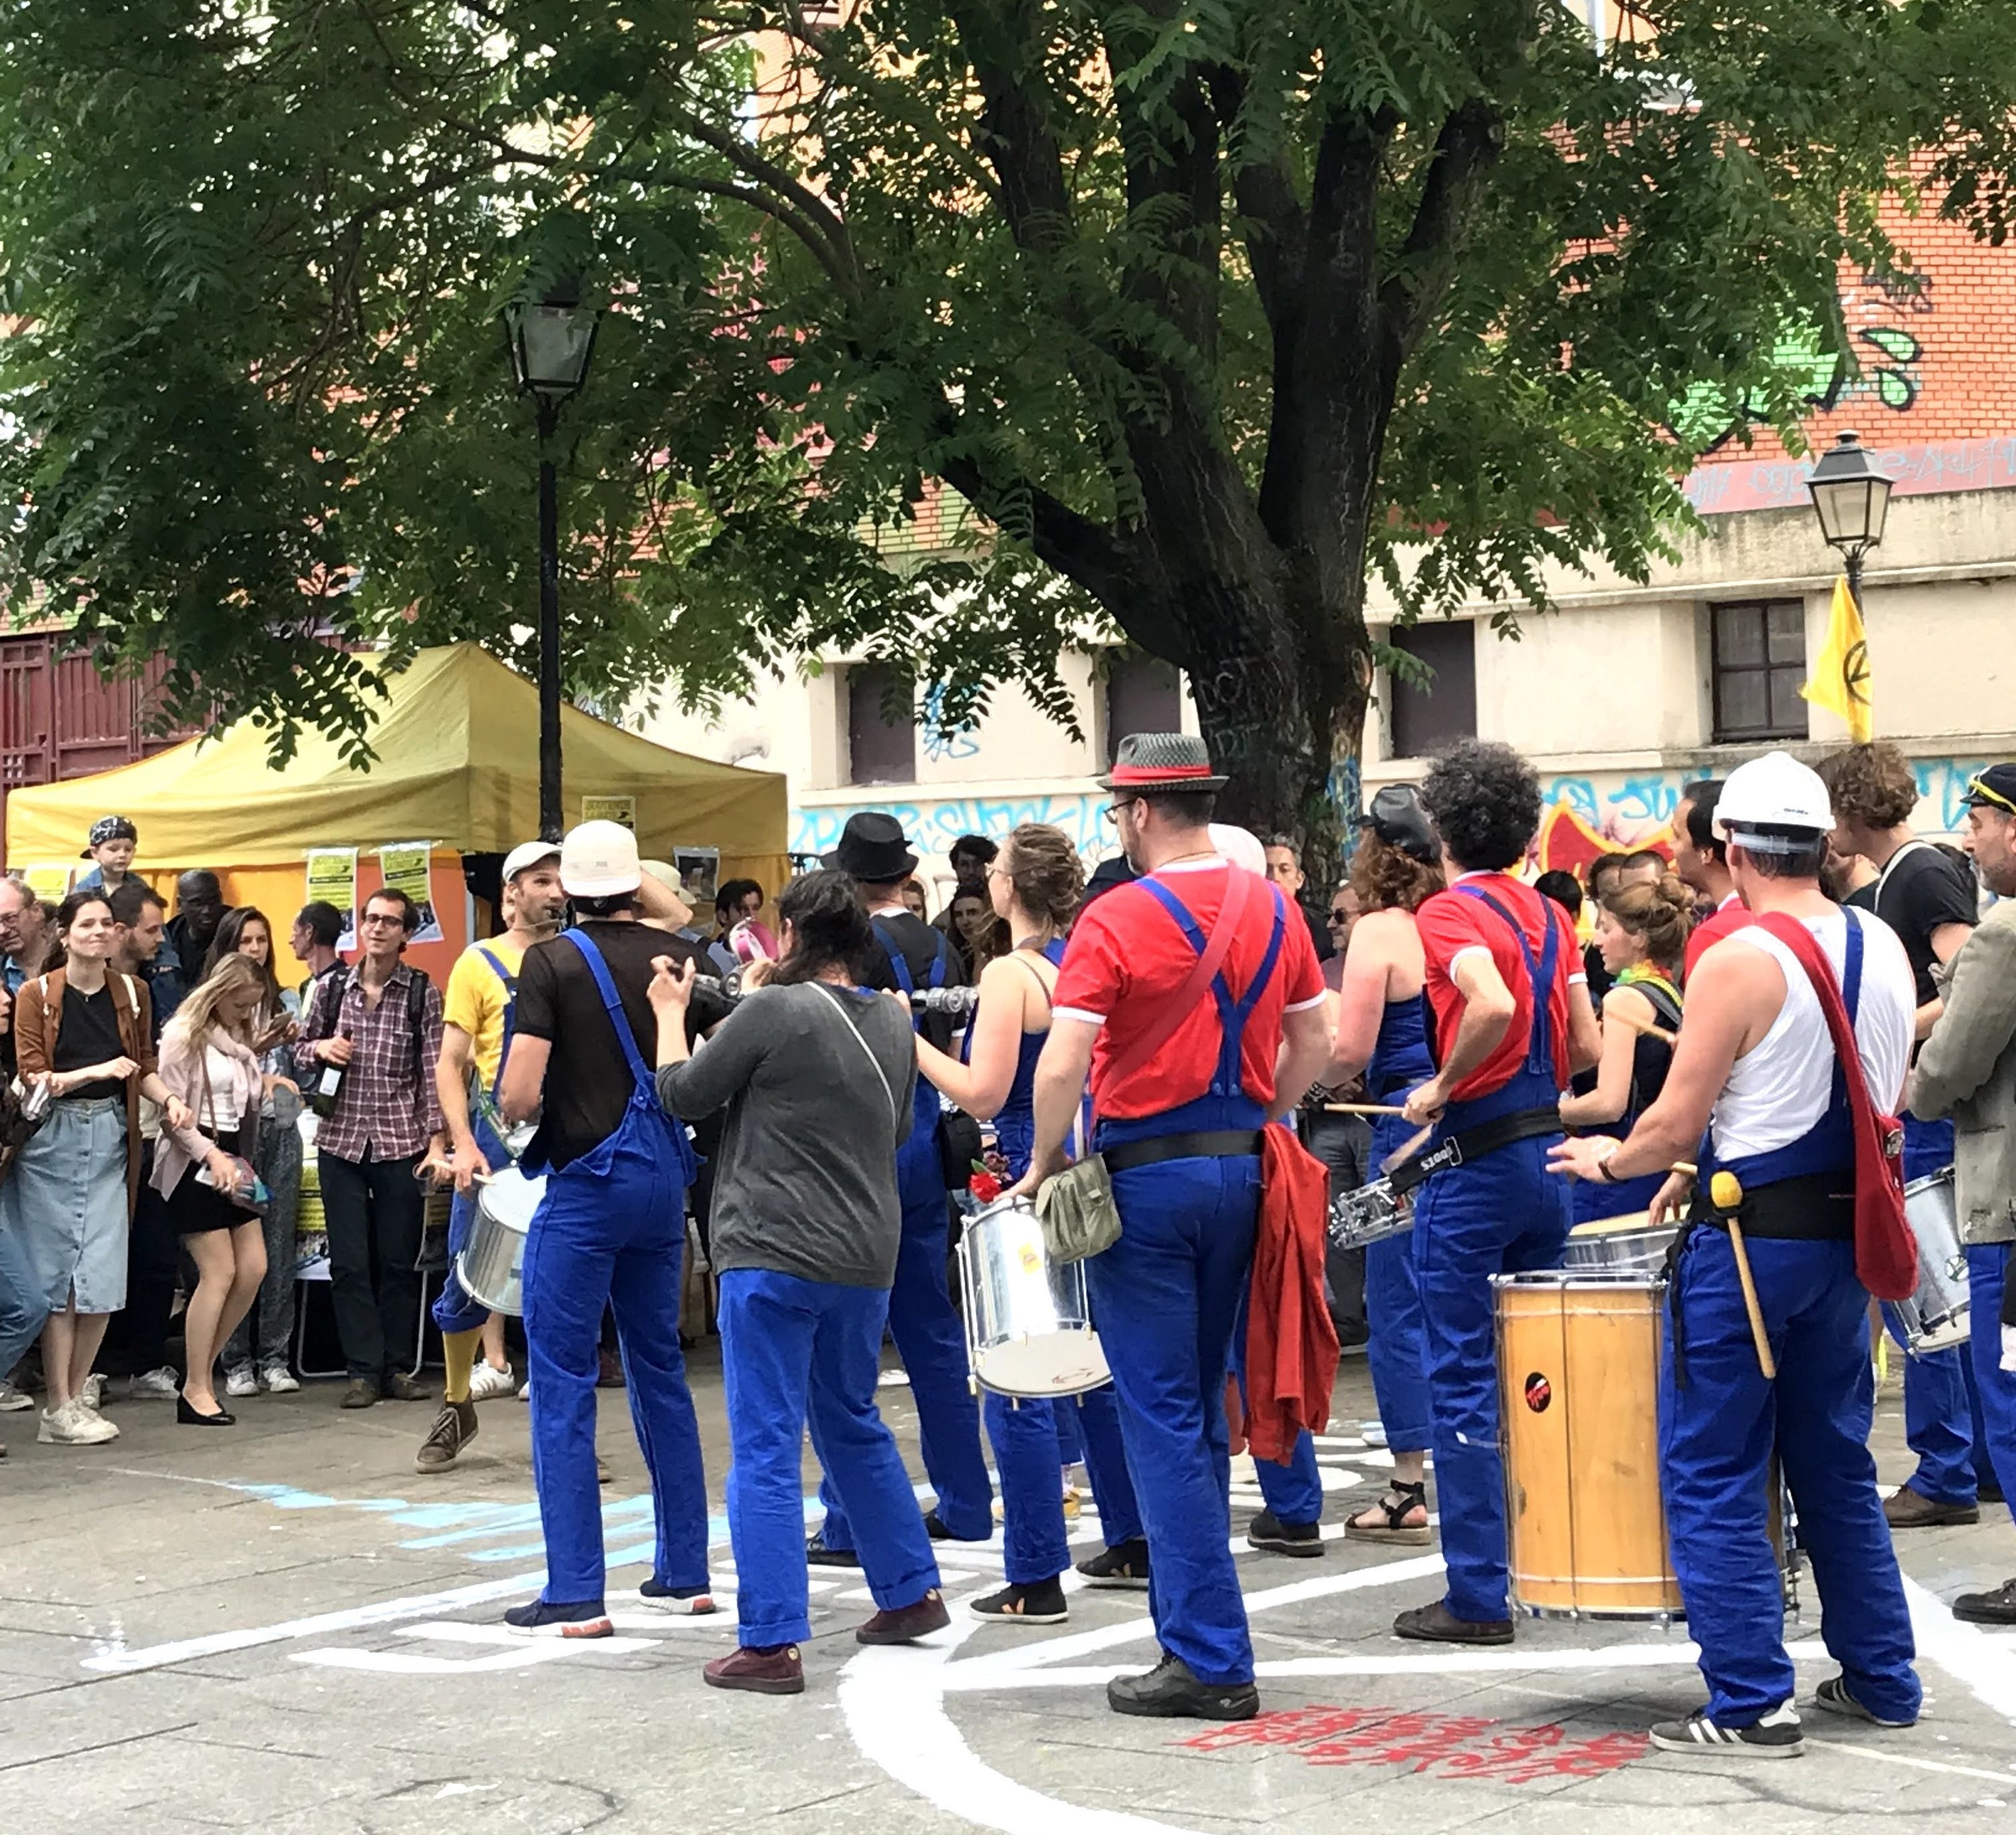 Group of musicians stand on the sidewalk playing music for an audience